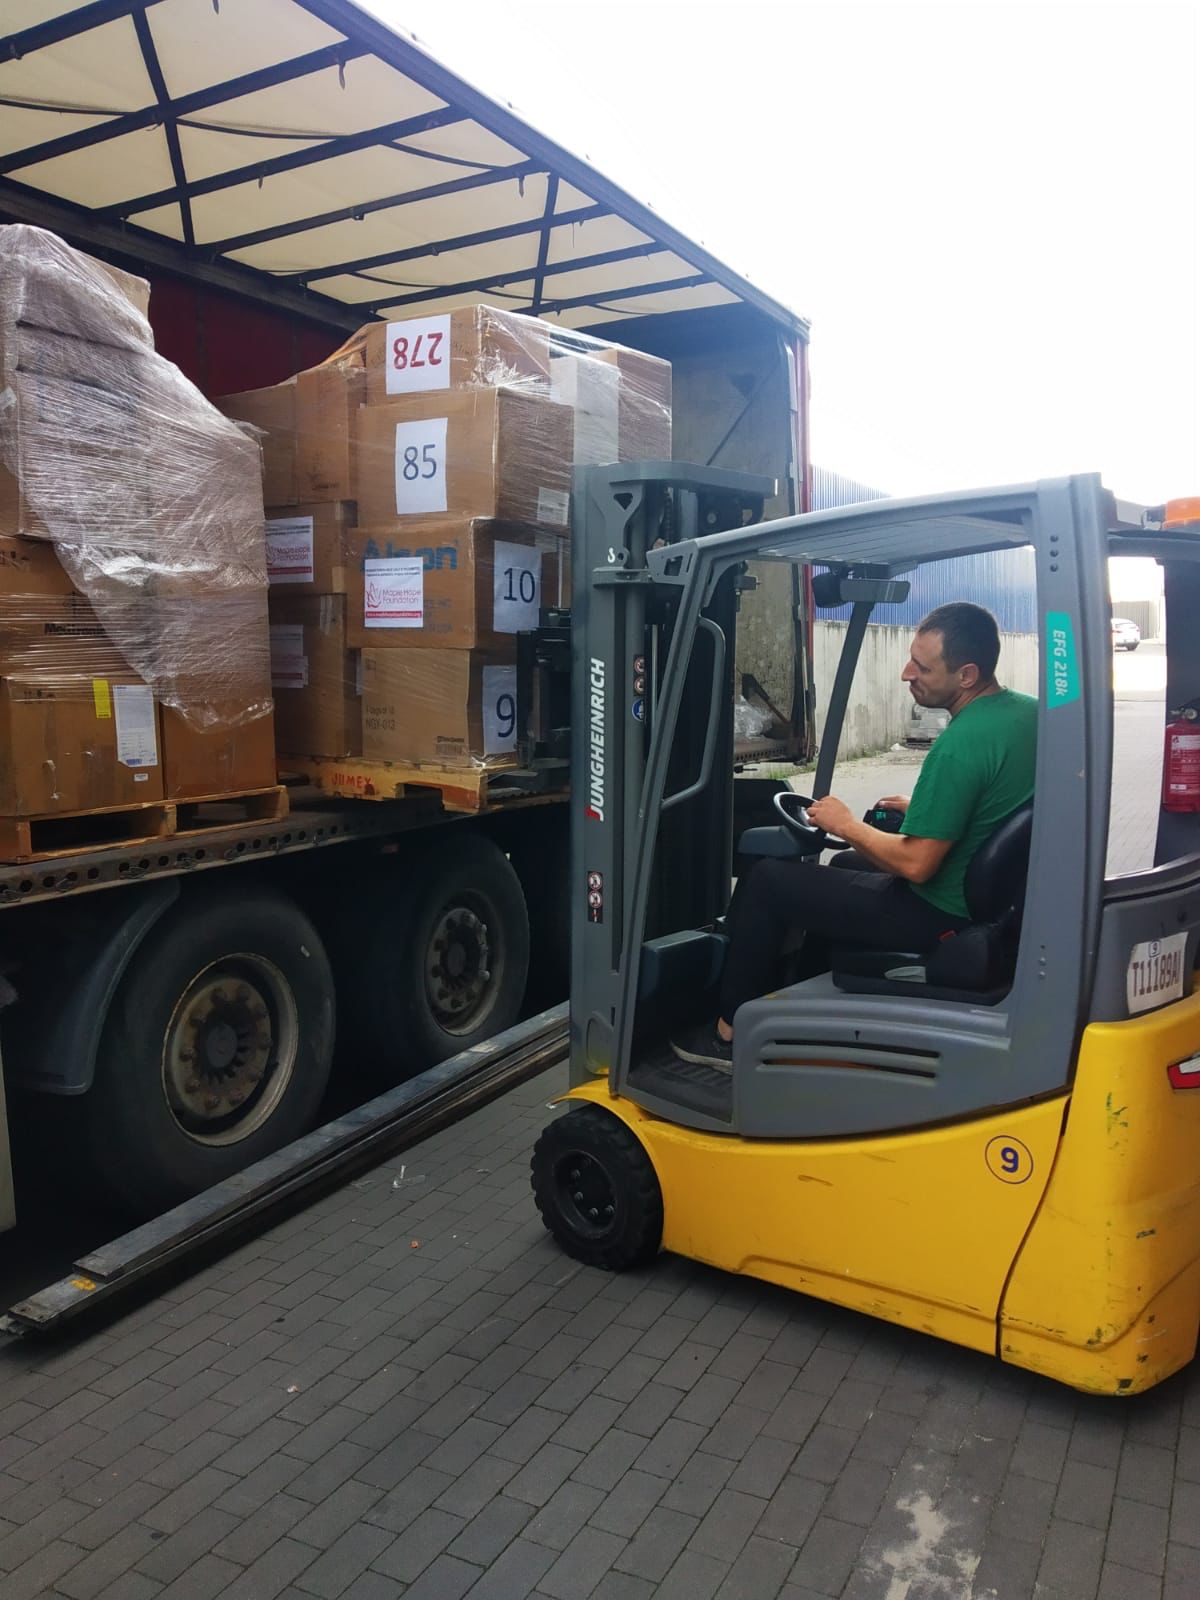 21 pallets of medical supplies from Canada for Ukrainian hospitals